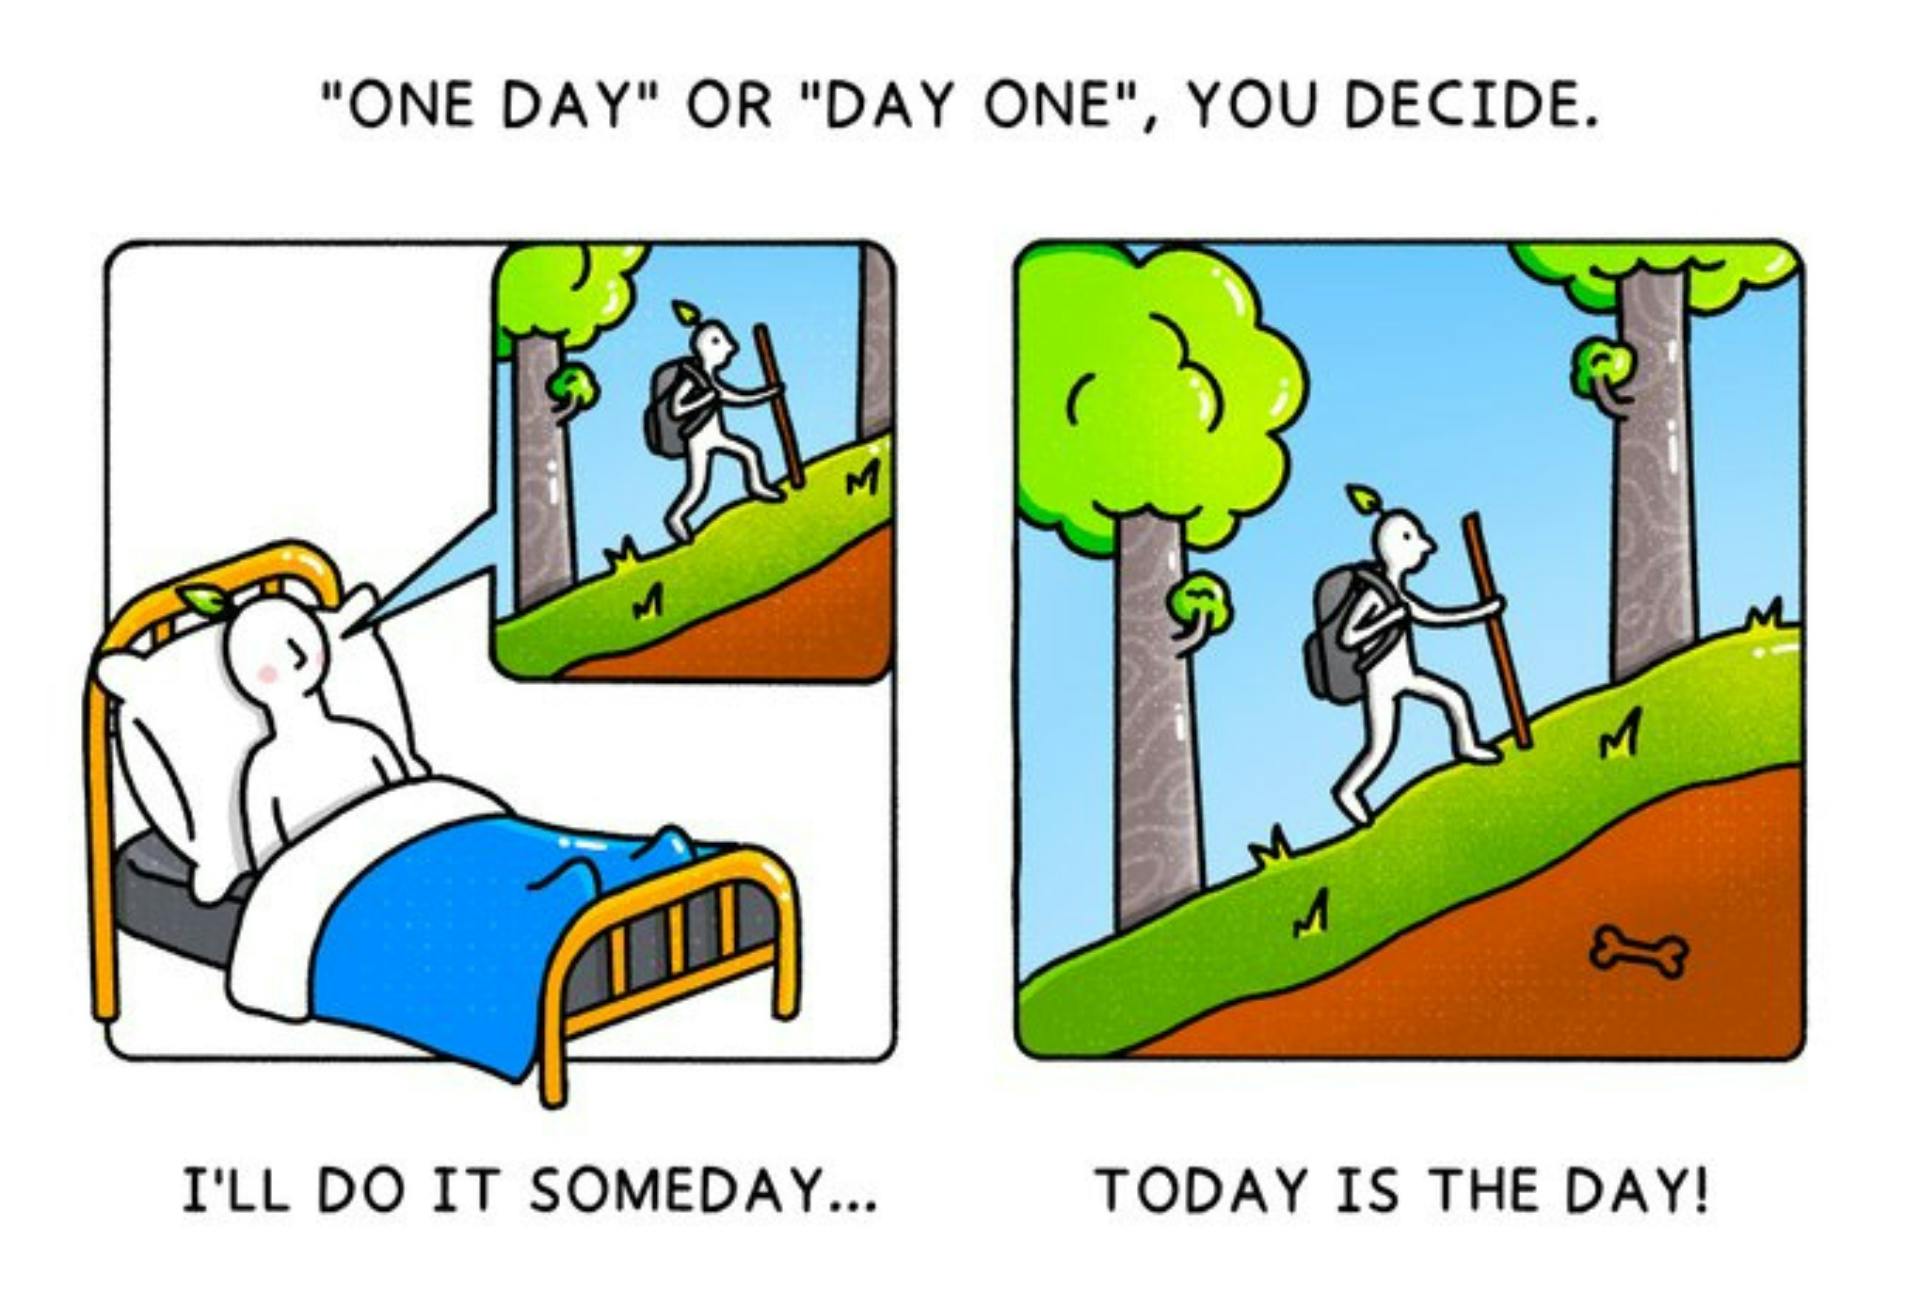 "One day" or "day one", with illustration